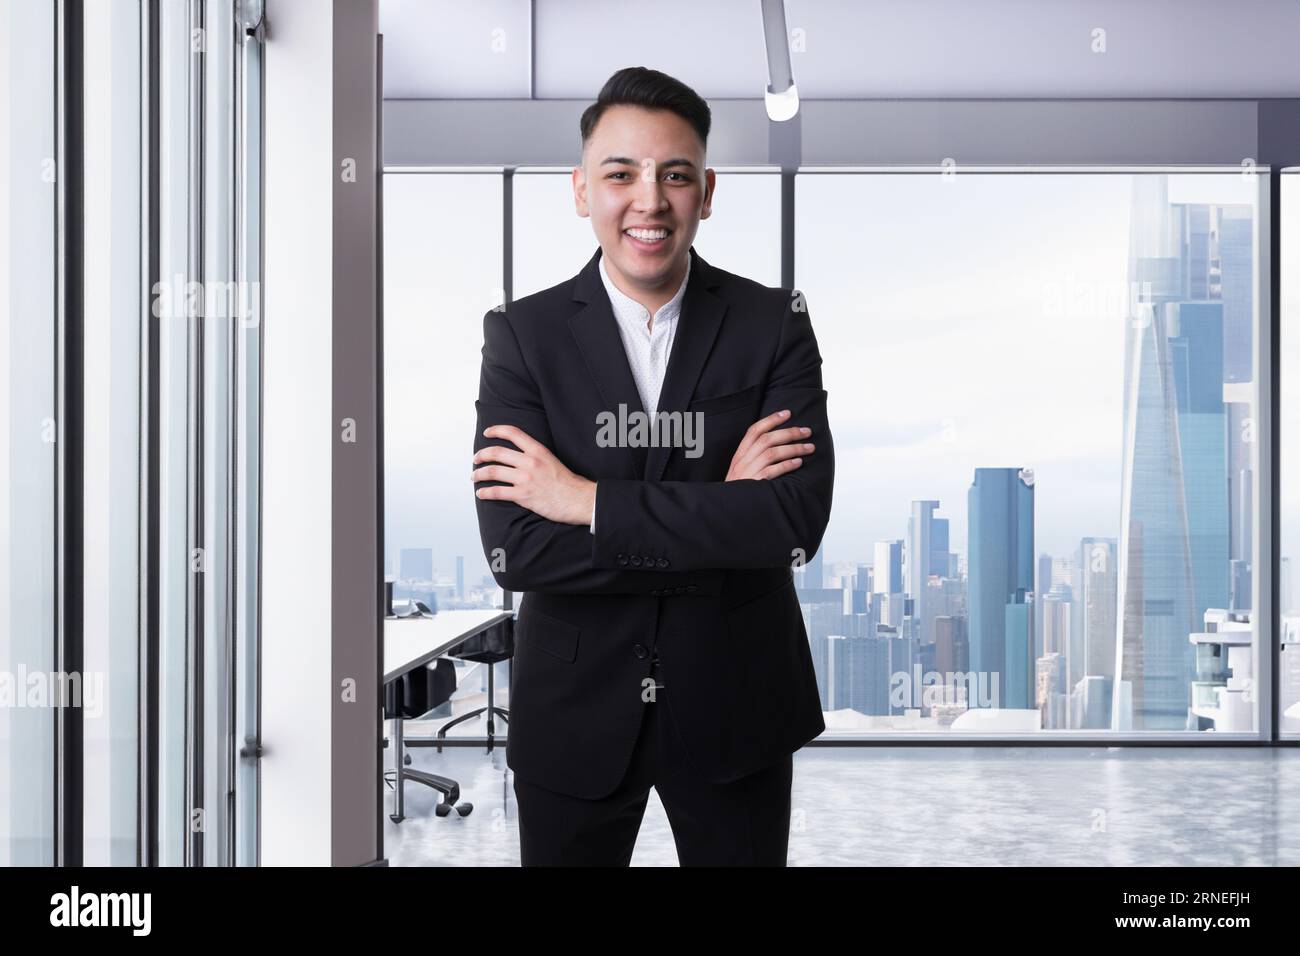 mexican young business man stand with crossed arms in front of big window with city skyline in background while he smile and is happy about his succes Stock Photo